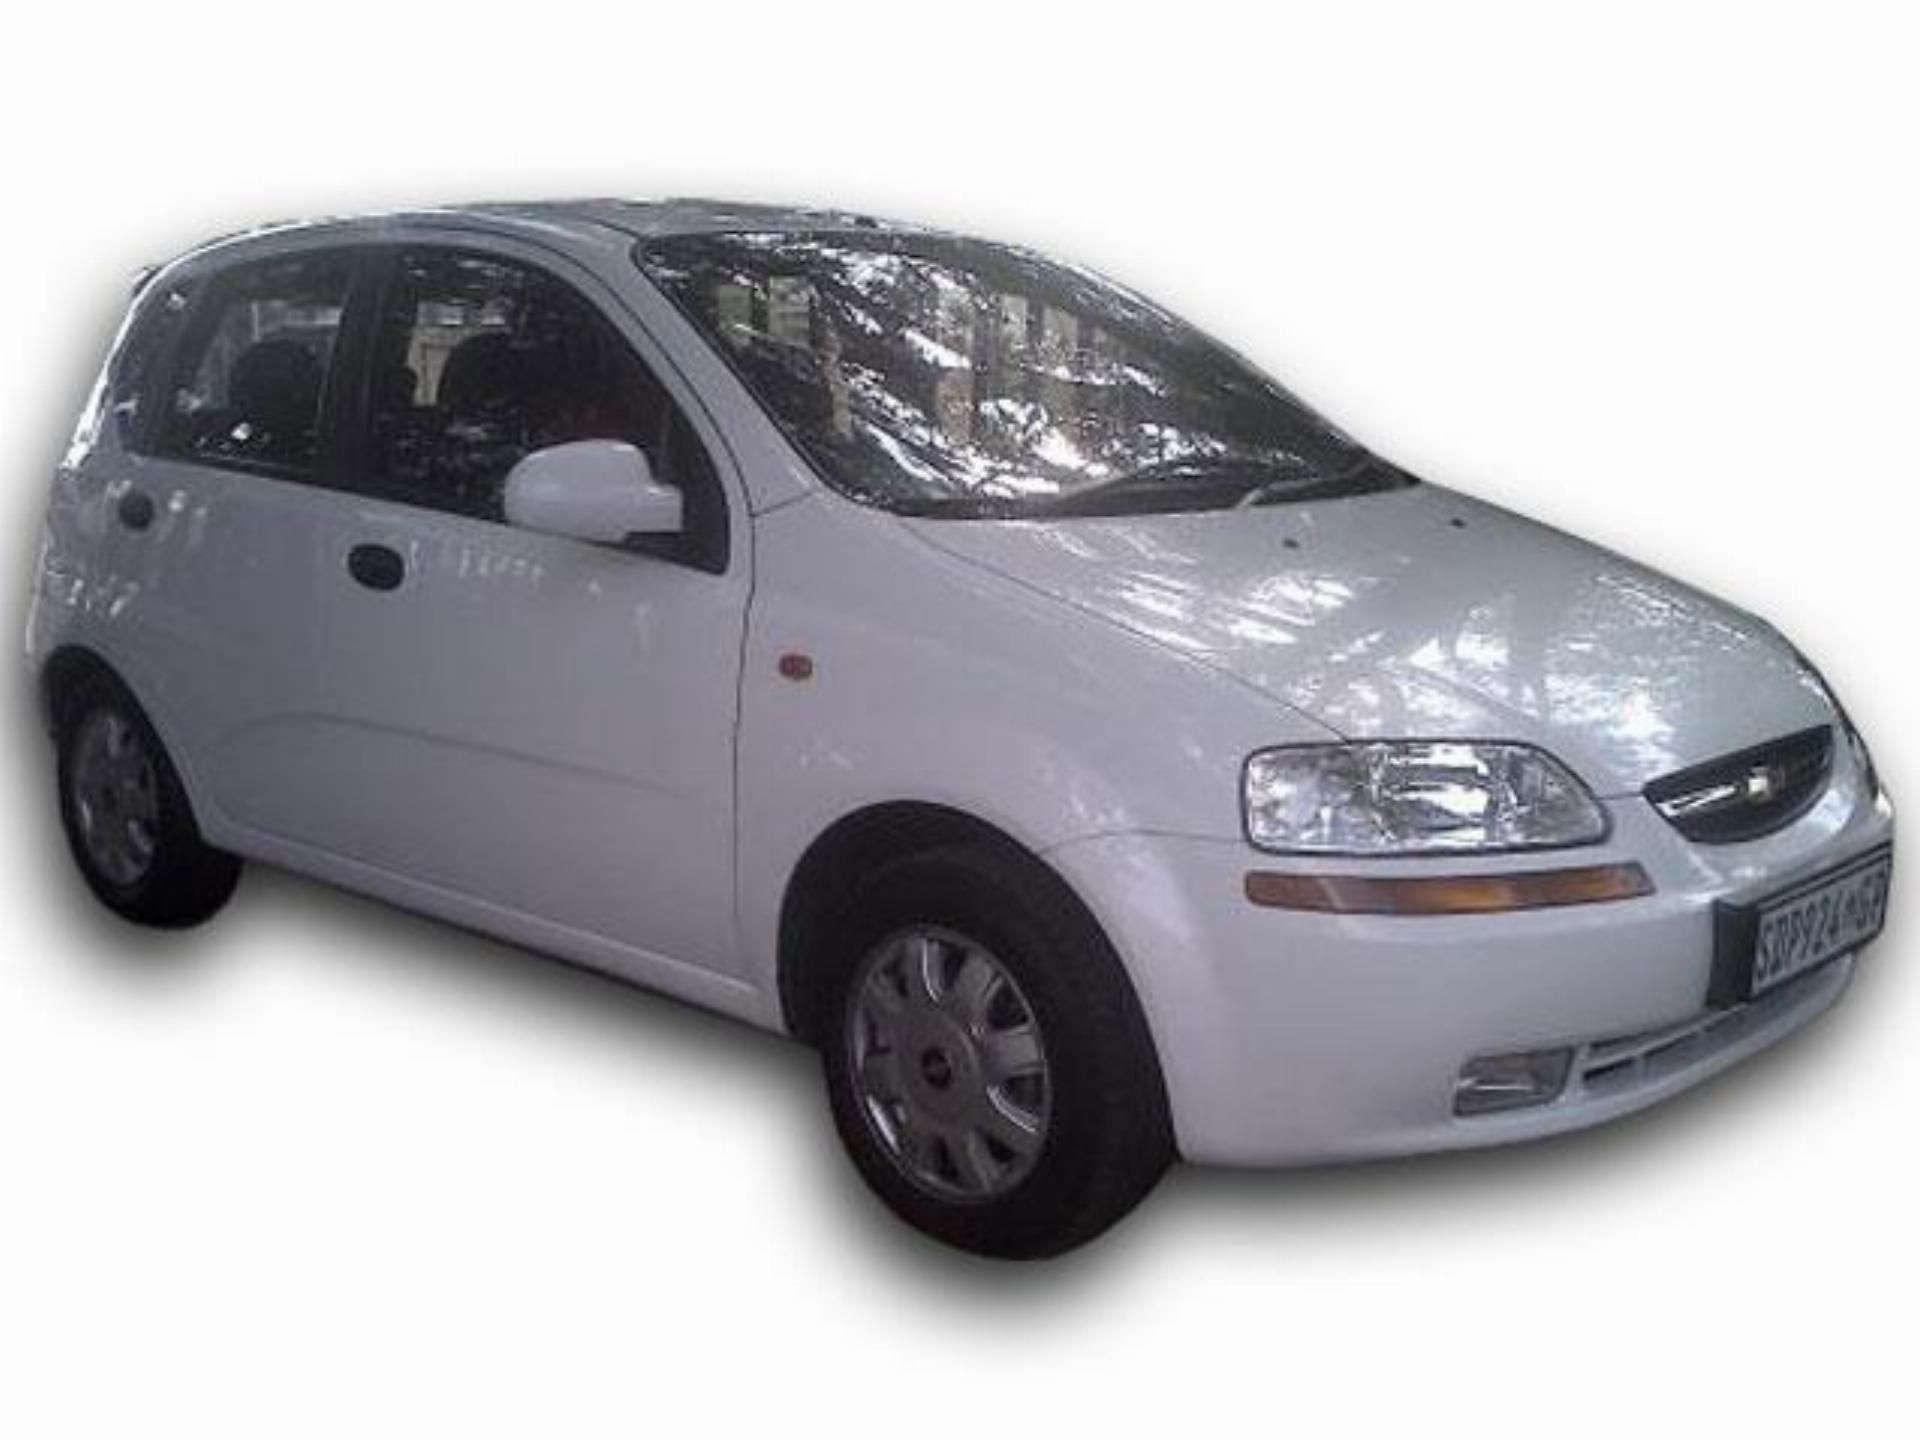 Used Chevrolet Aveo 1.5 LS 5DR 2005 on auction PV1004030